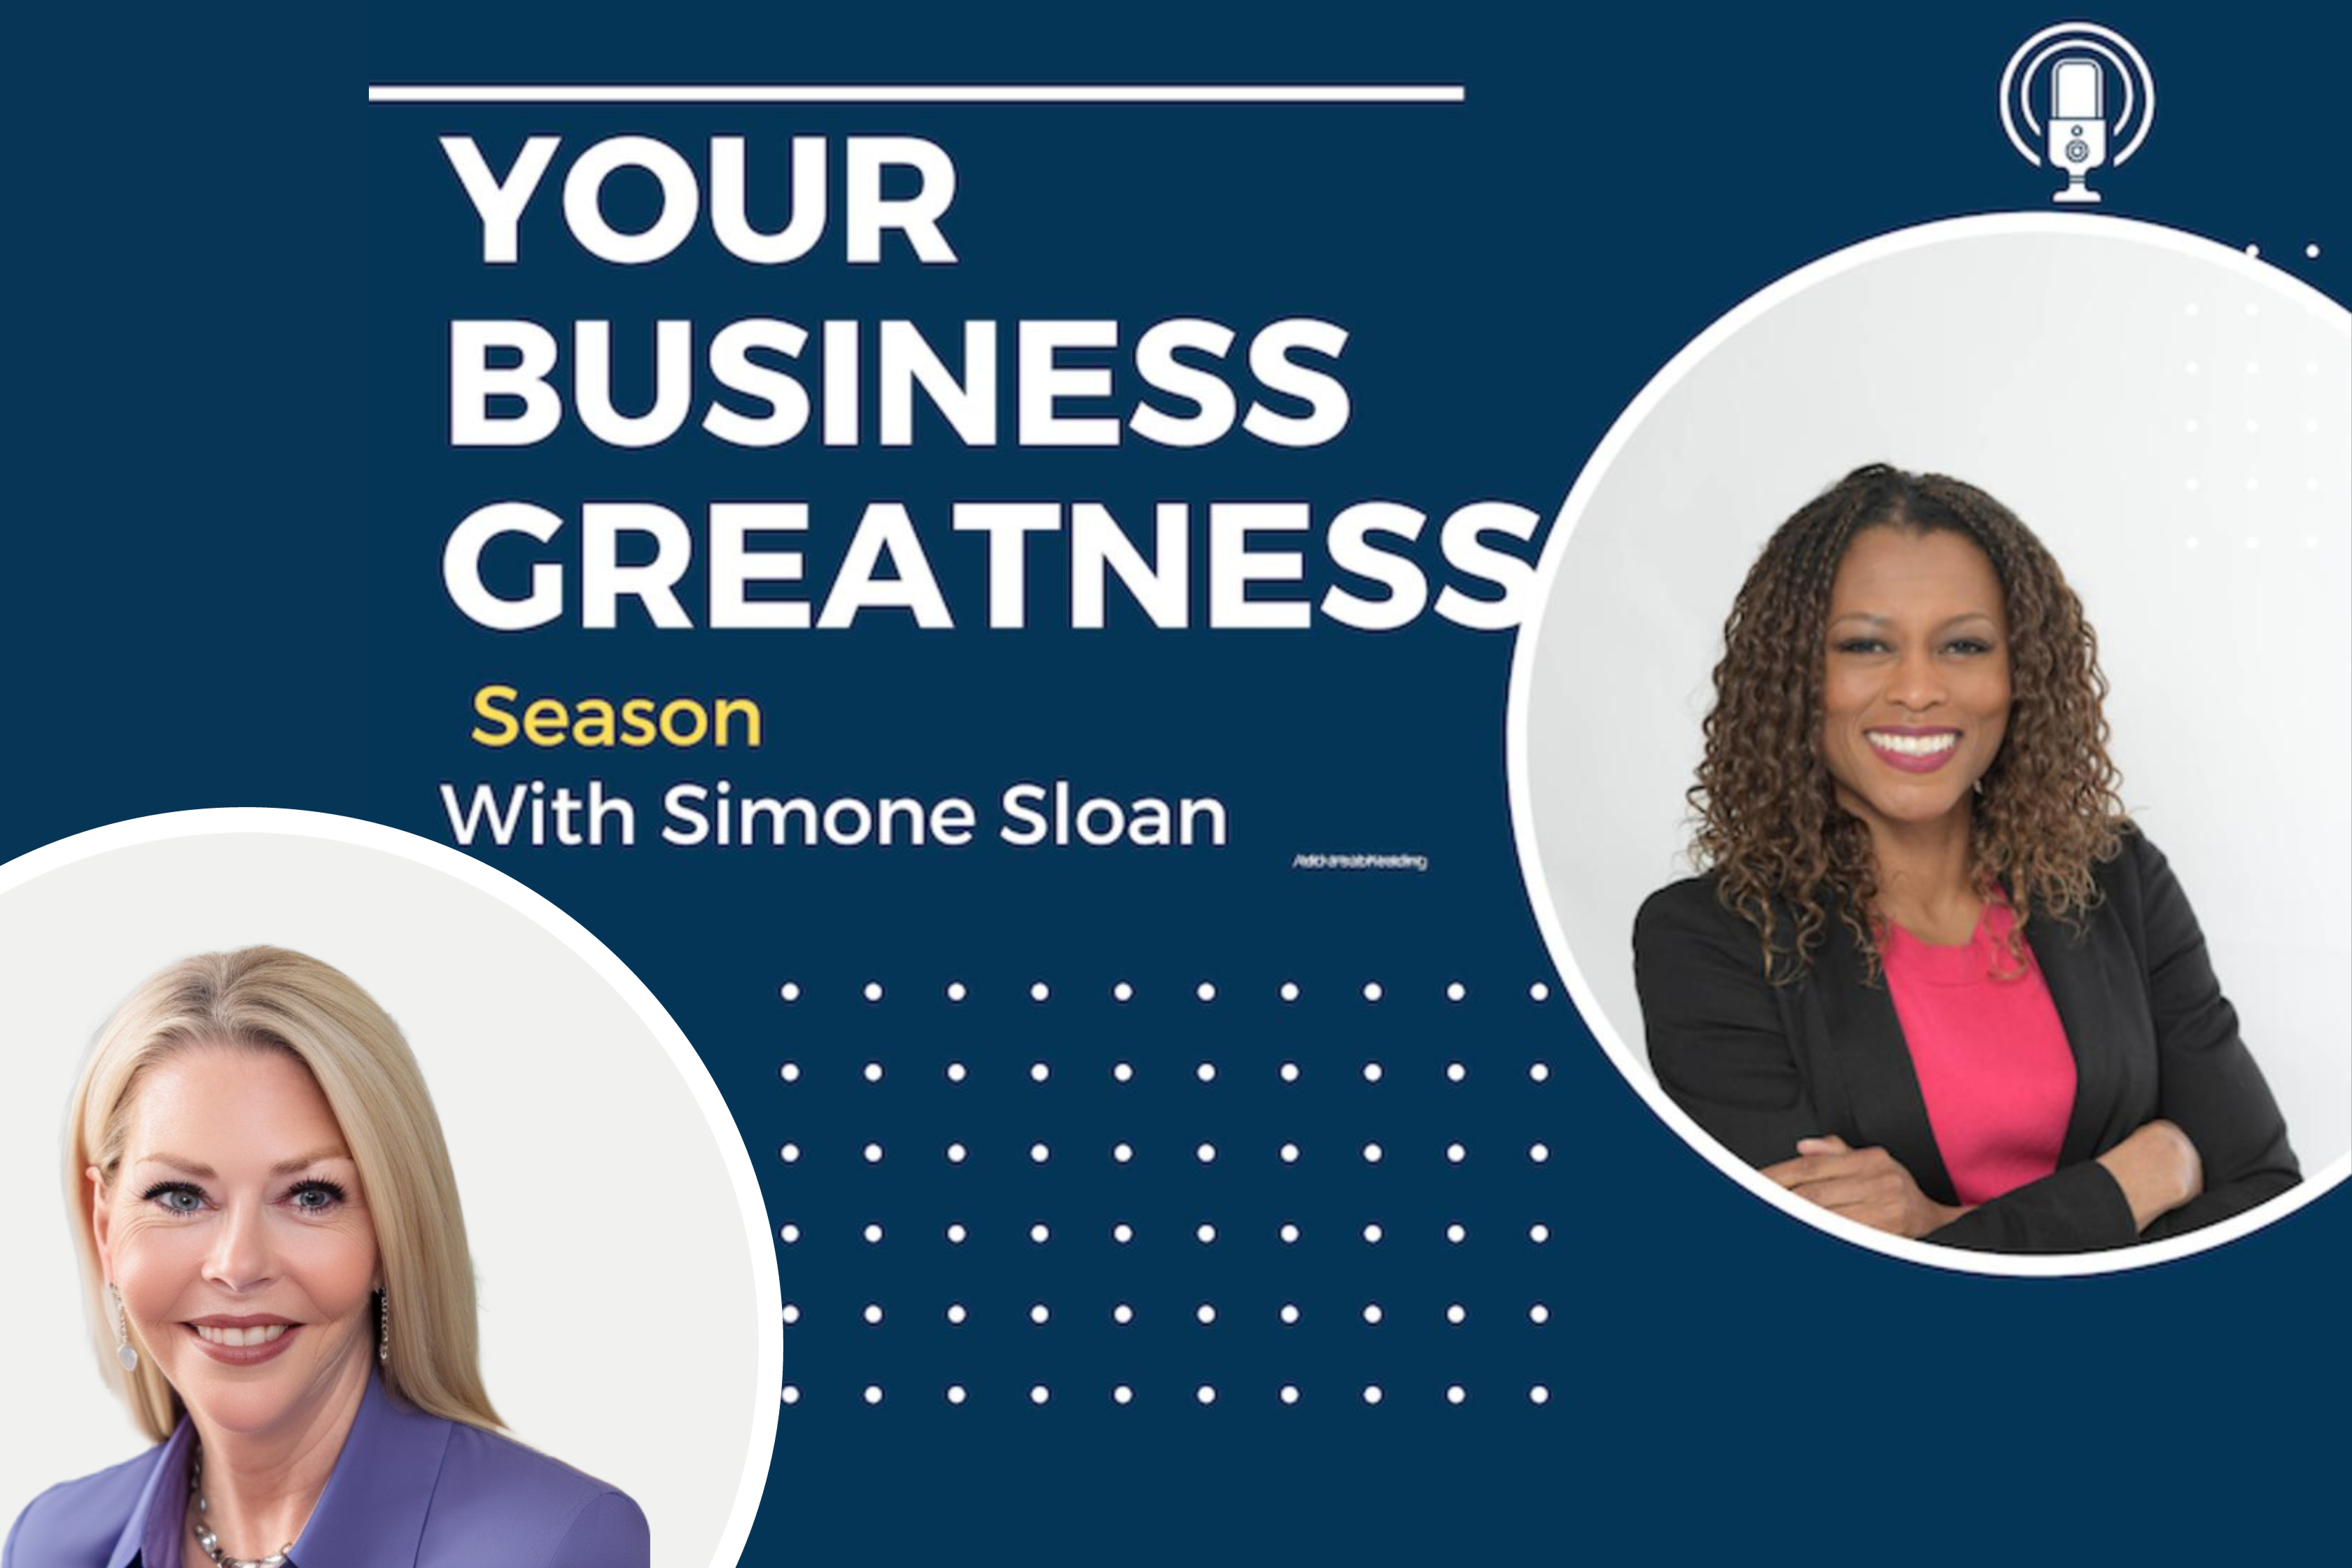 Kitty Hart Discusses Brand Experience on Your Business Greatness Podcast